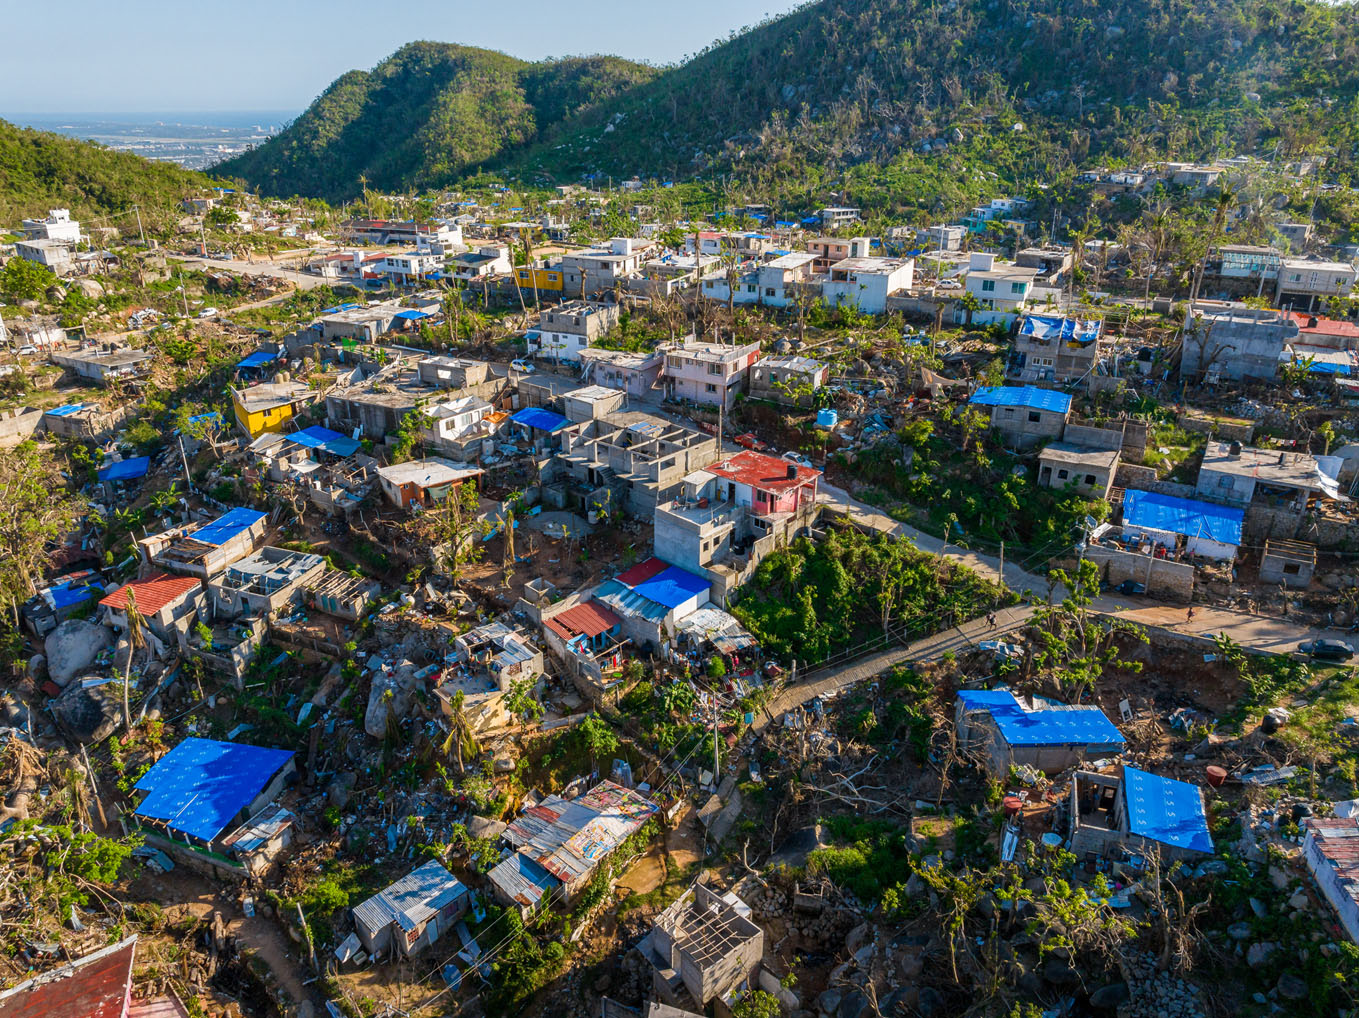 Volunteers helped tarp nearly 100 damaged roofs in the mountain communities surrounding Acapulco.